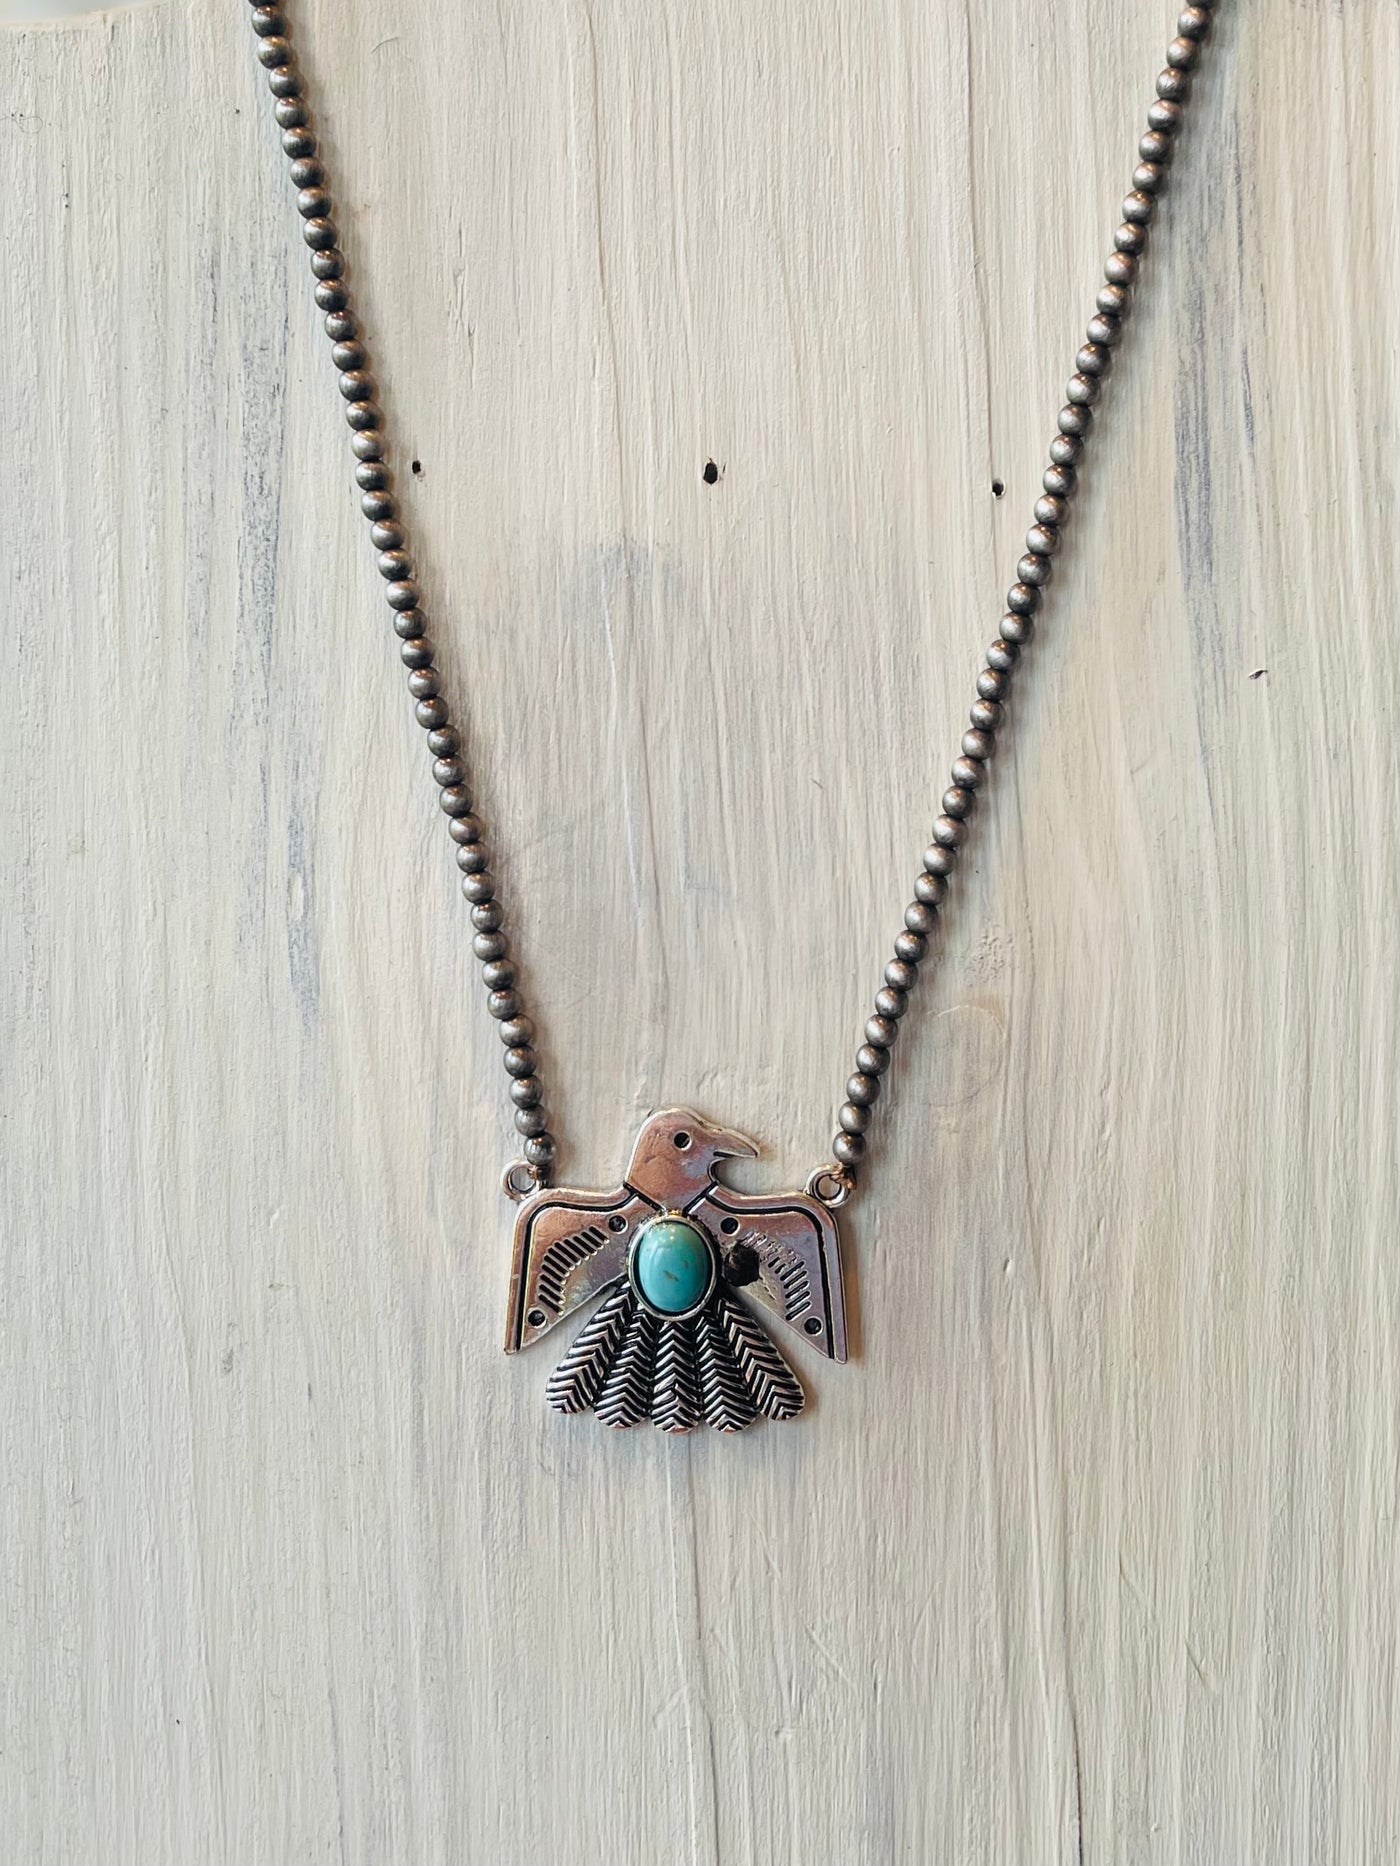 Take Flight Silver Necklace with Silver Eagle and Turquoise Stone